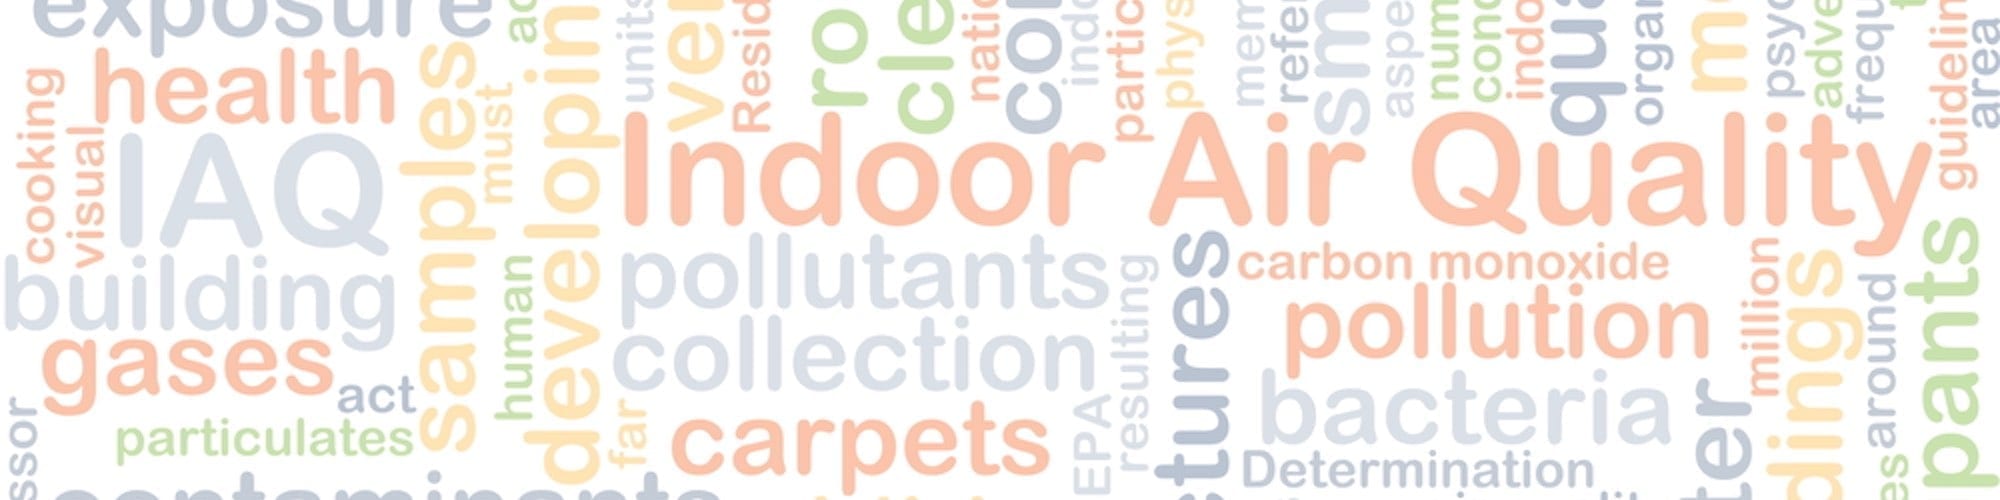 What is IAQ? Indoor Air Quality?